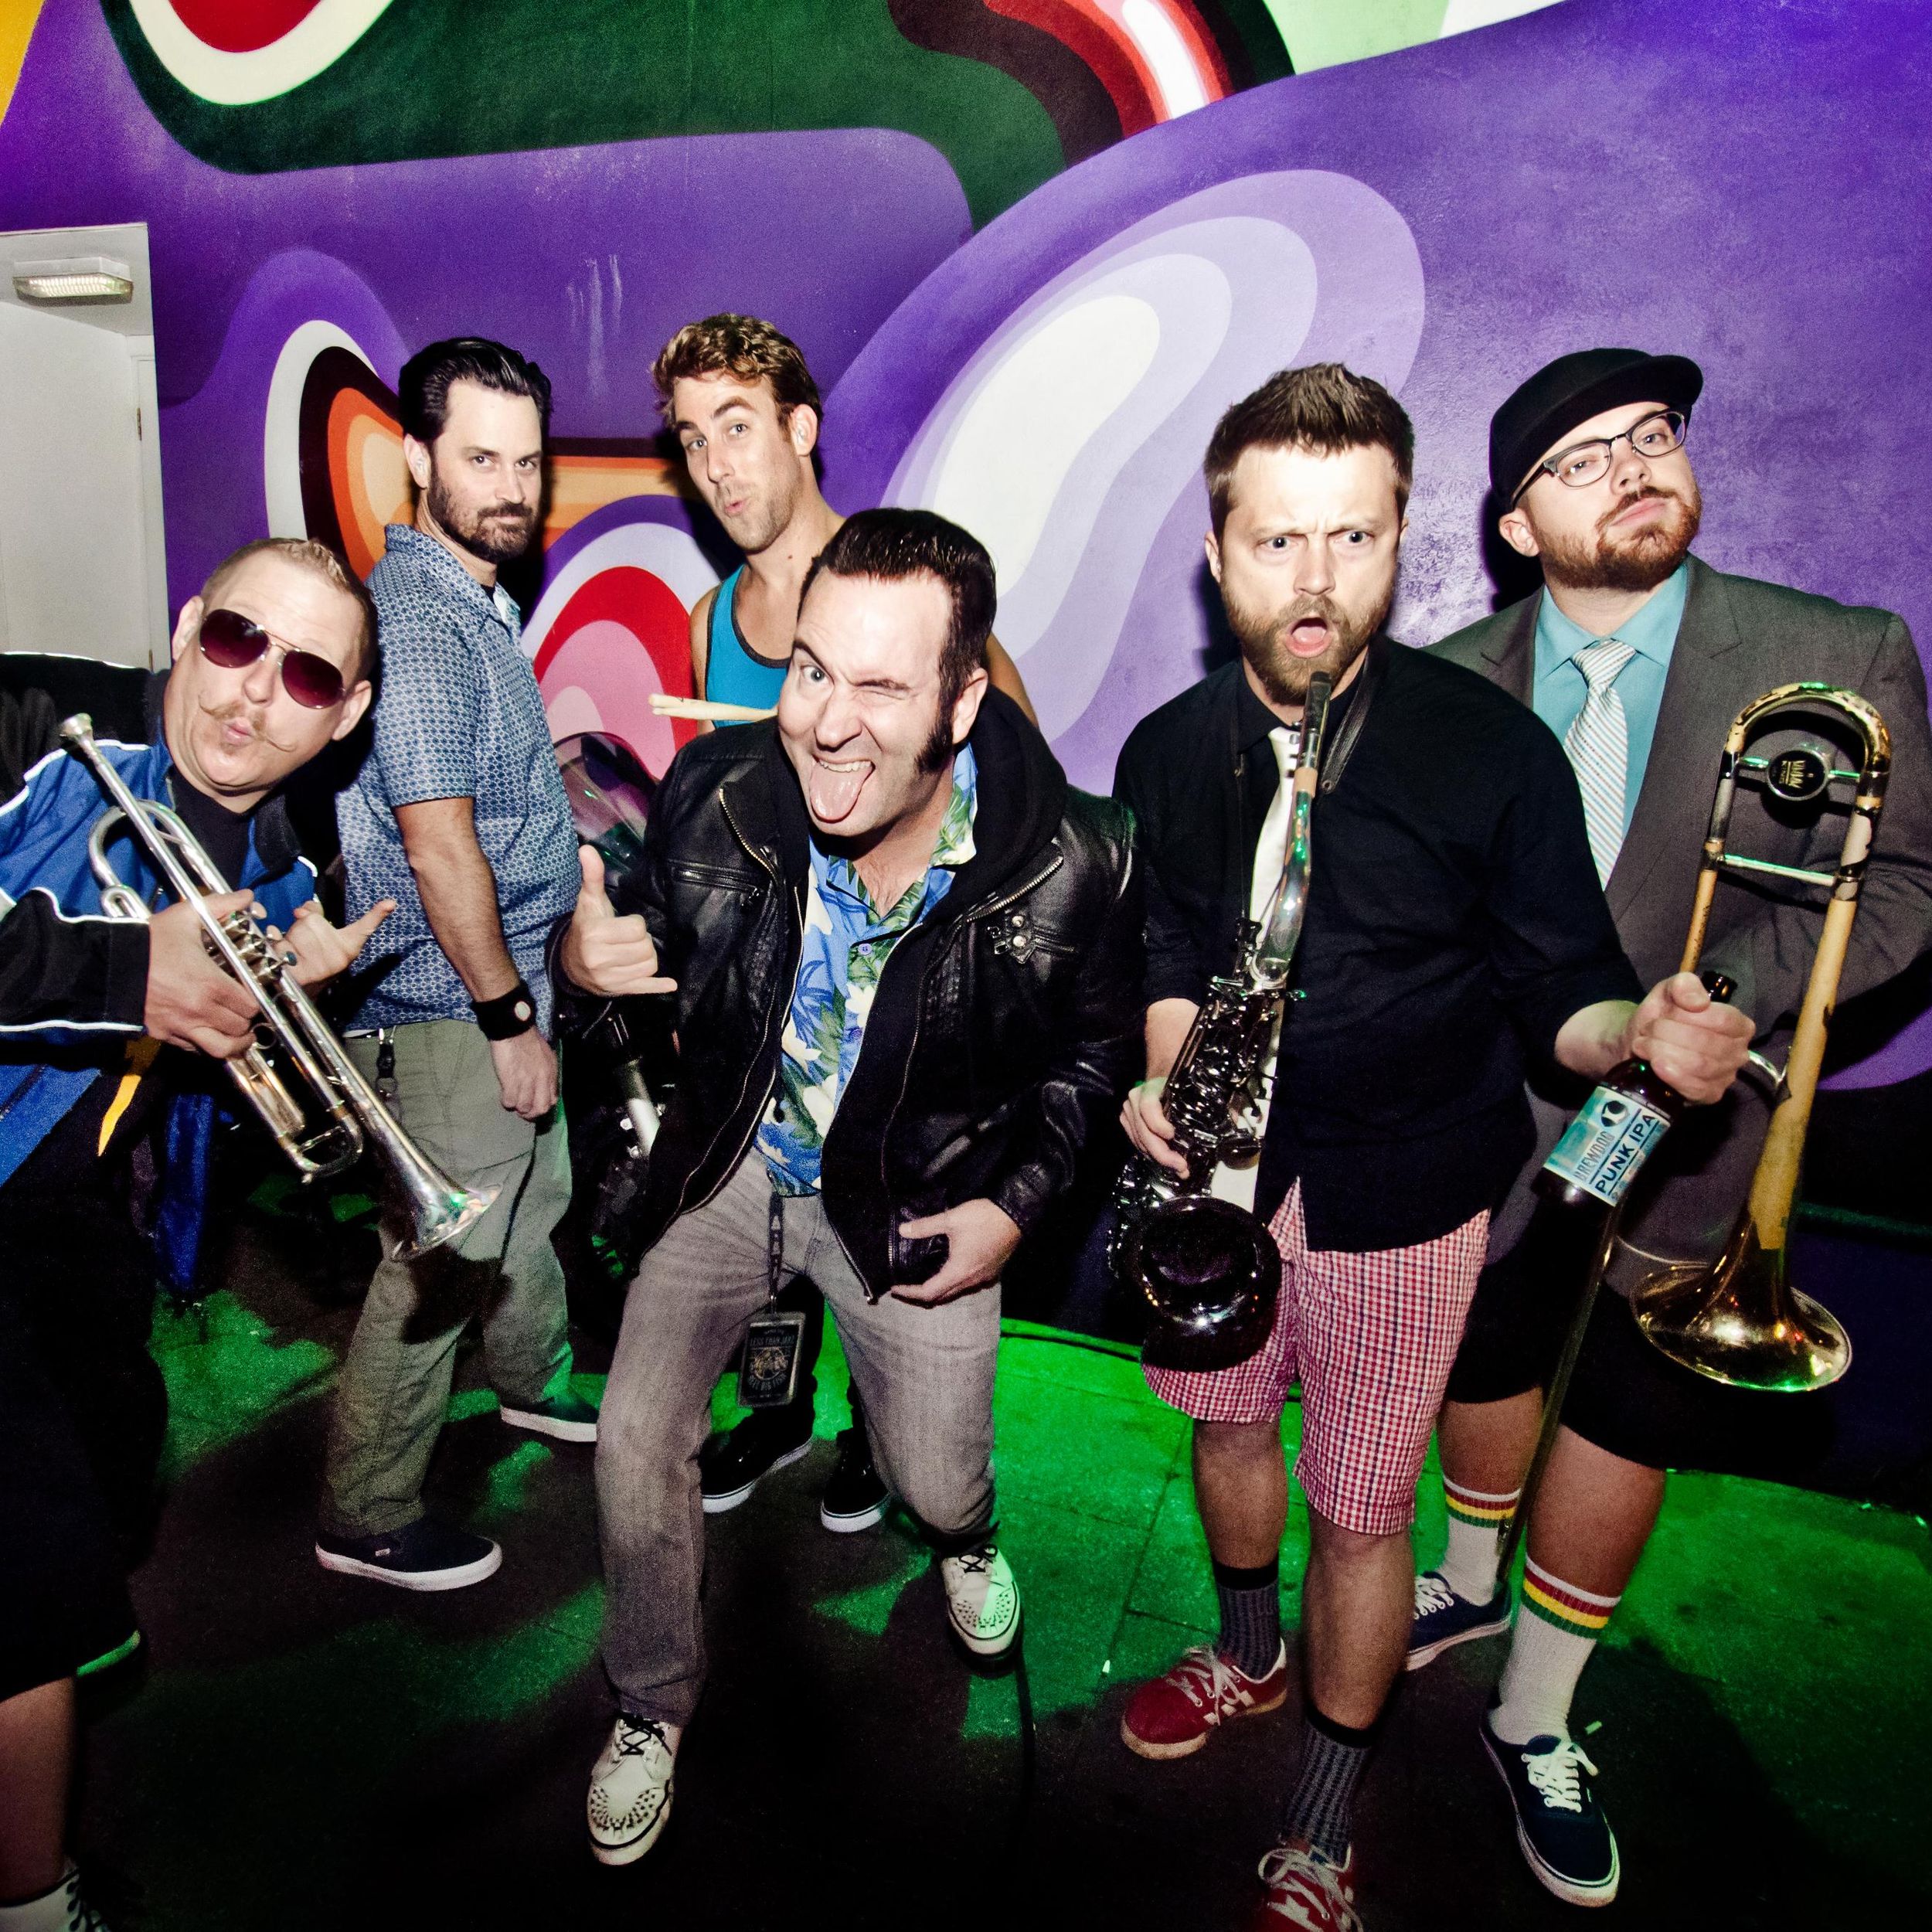 Reel Big Fish looks to capture their vintage sound at Knitting Factory show